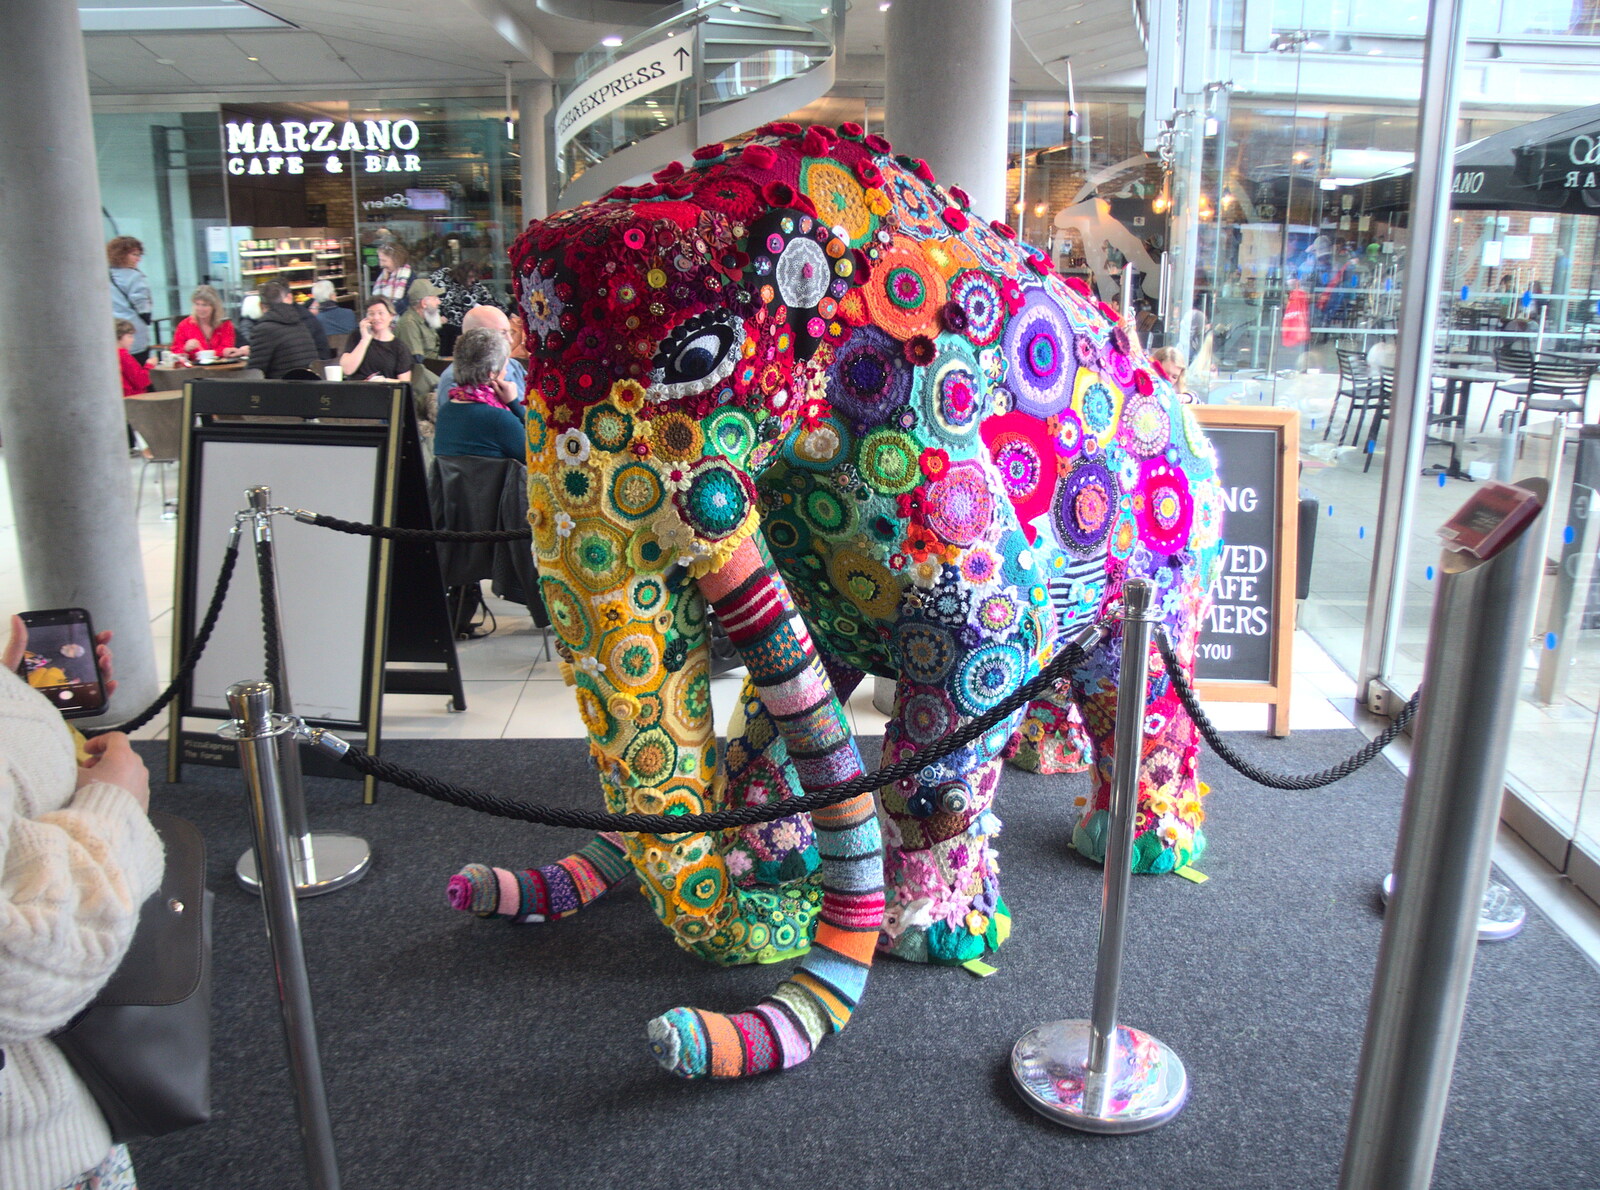 Isobel gets a photo of a crocheted Wooly Mammoth from It's a Stitch Up: A Trip to Norwich, Norfolk - 18th March 2023